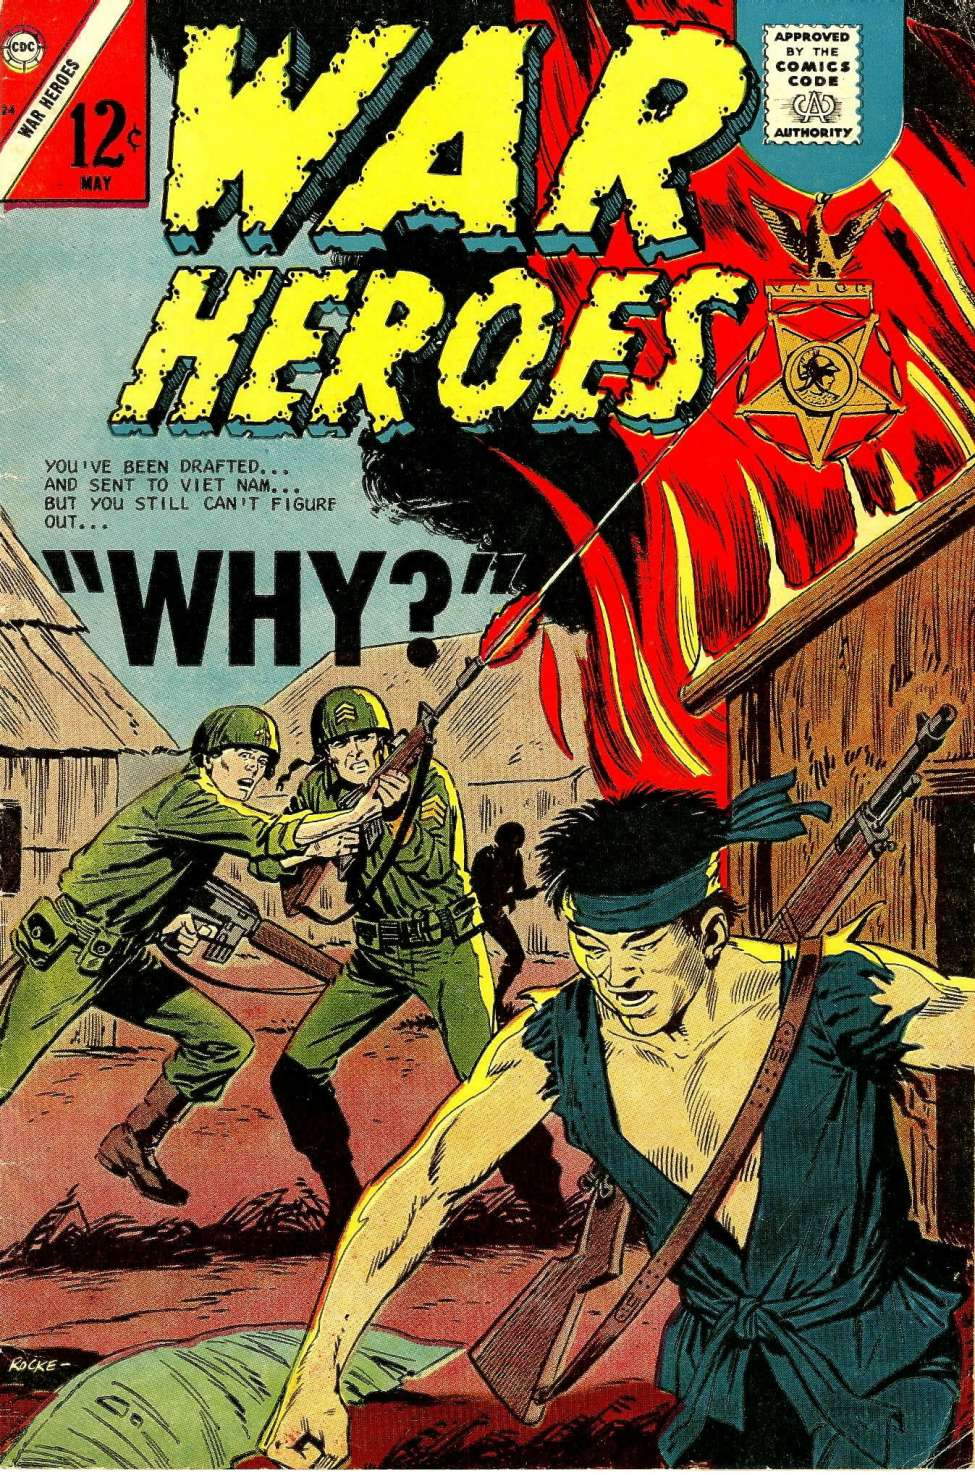 Book Cover For War Heroes 24